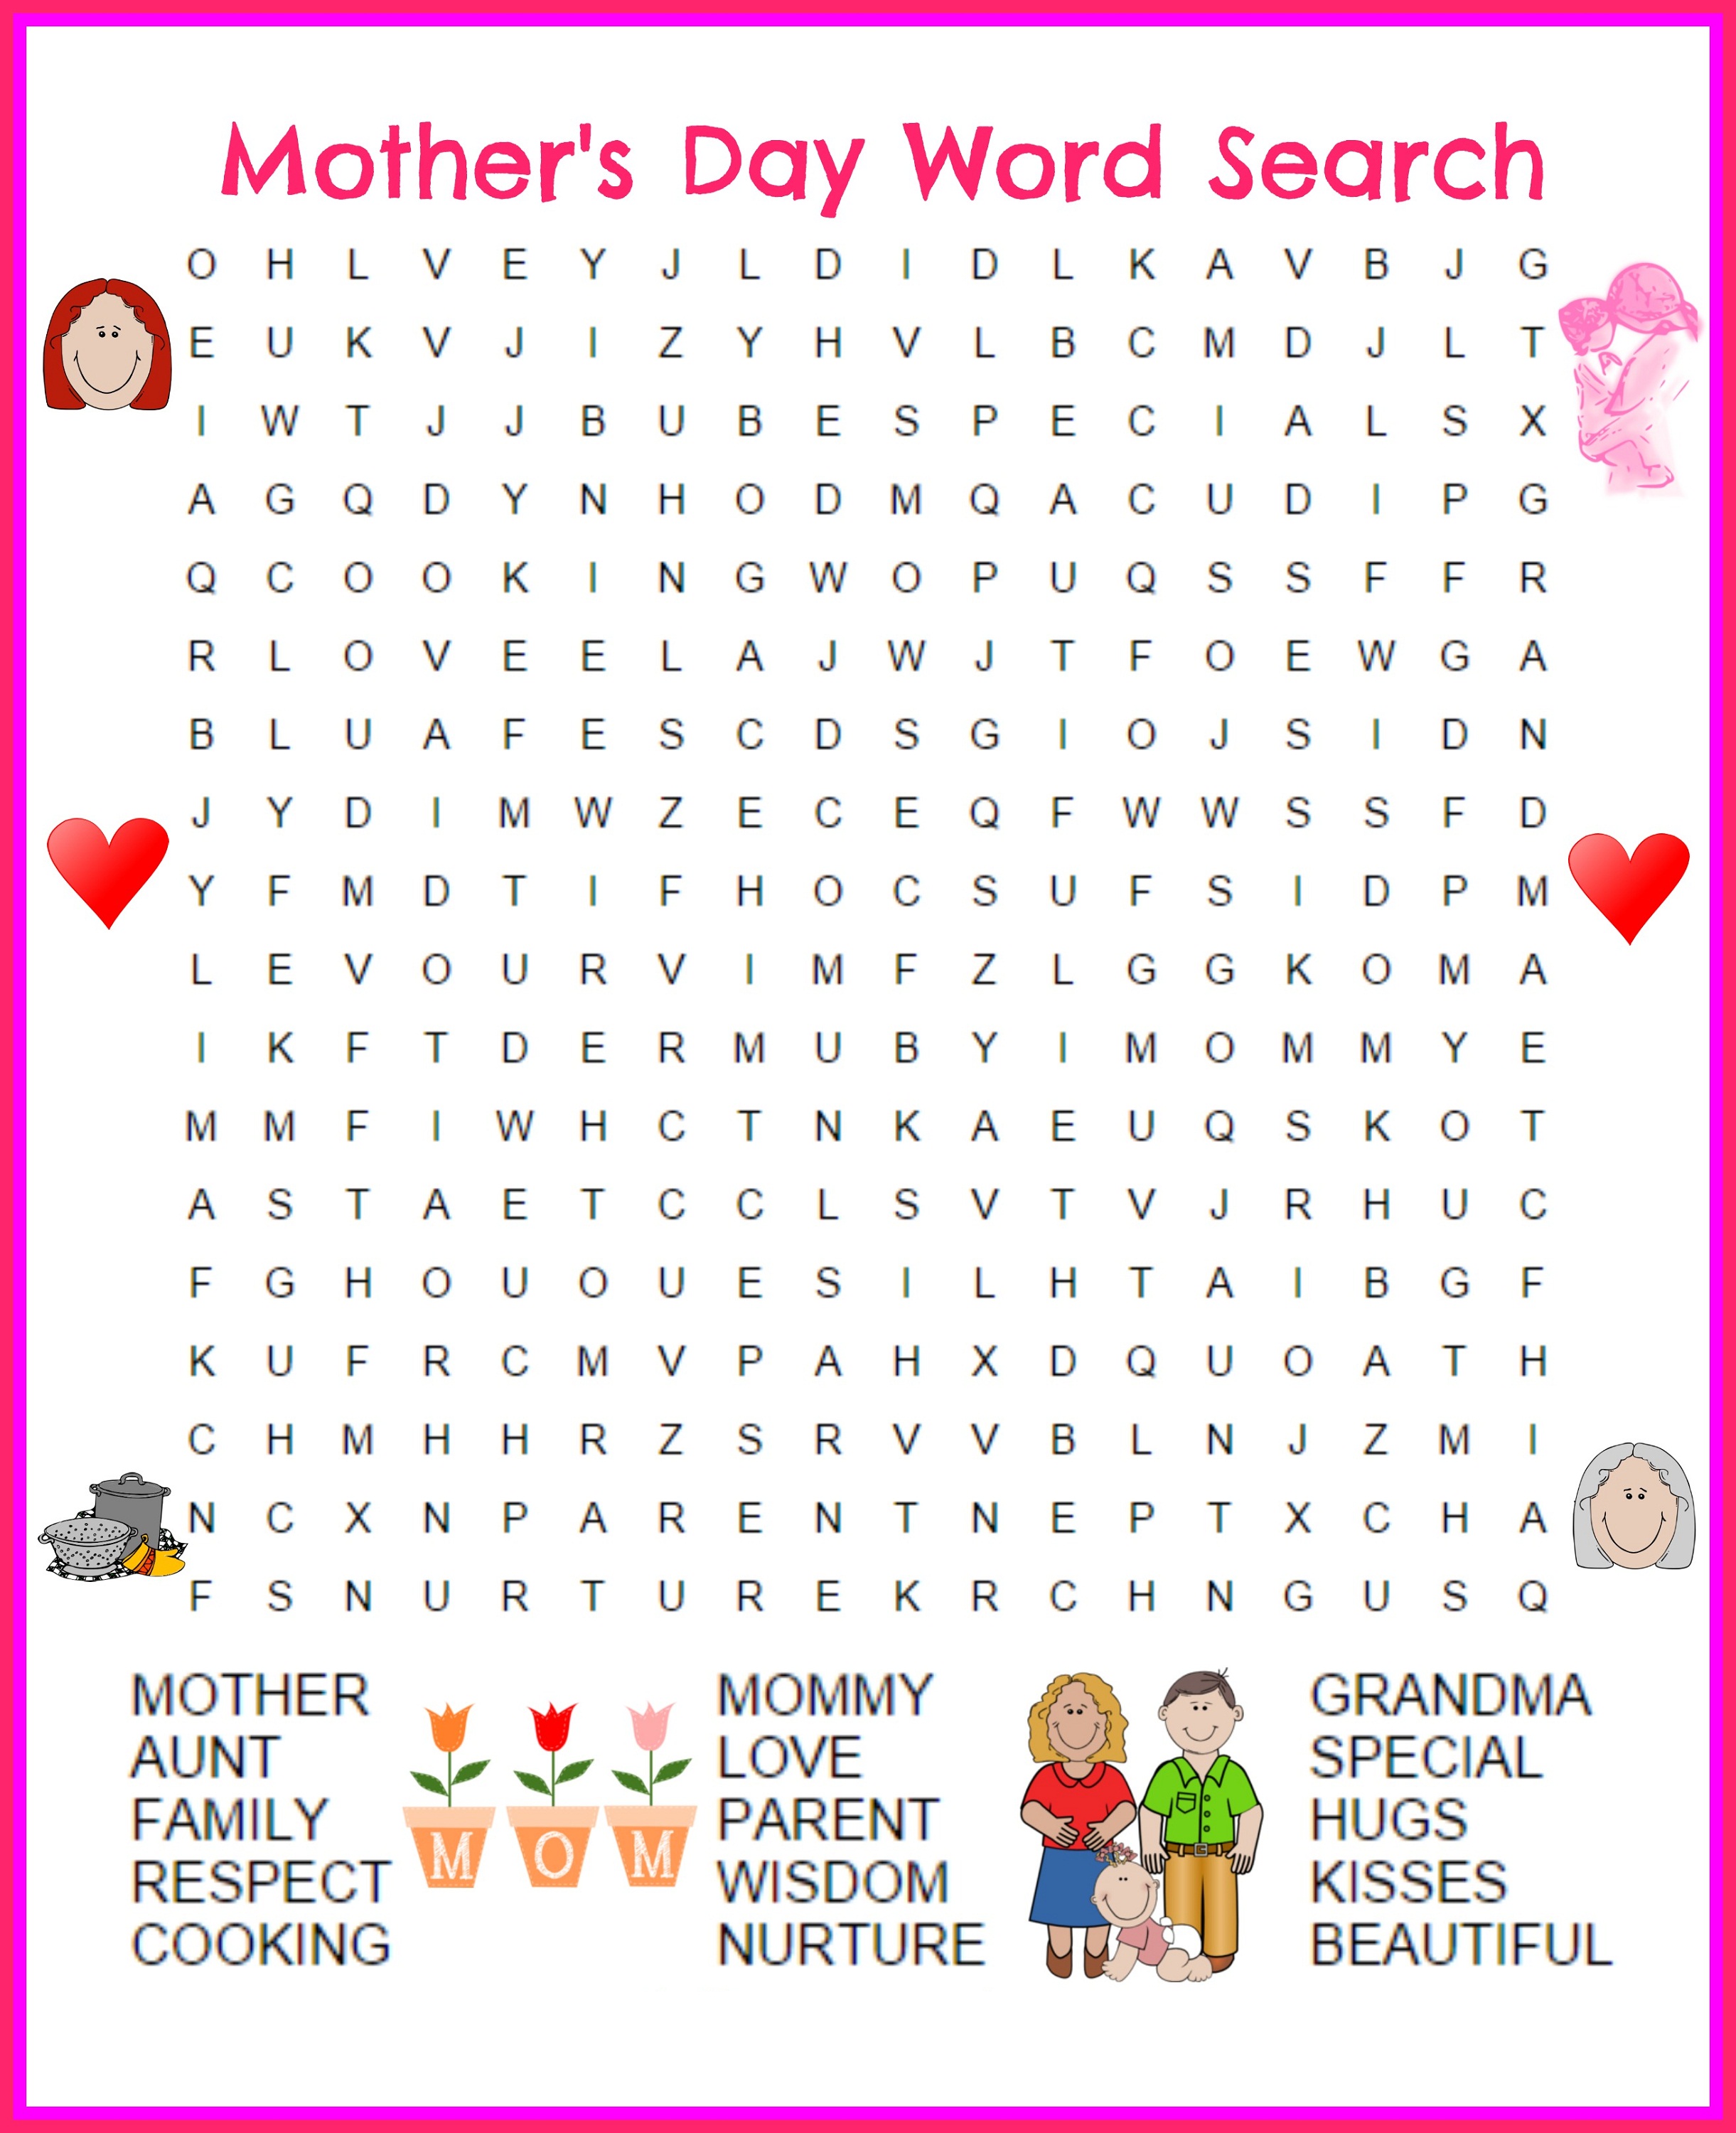 great day word search mother's day